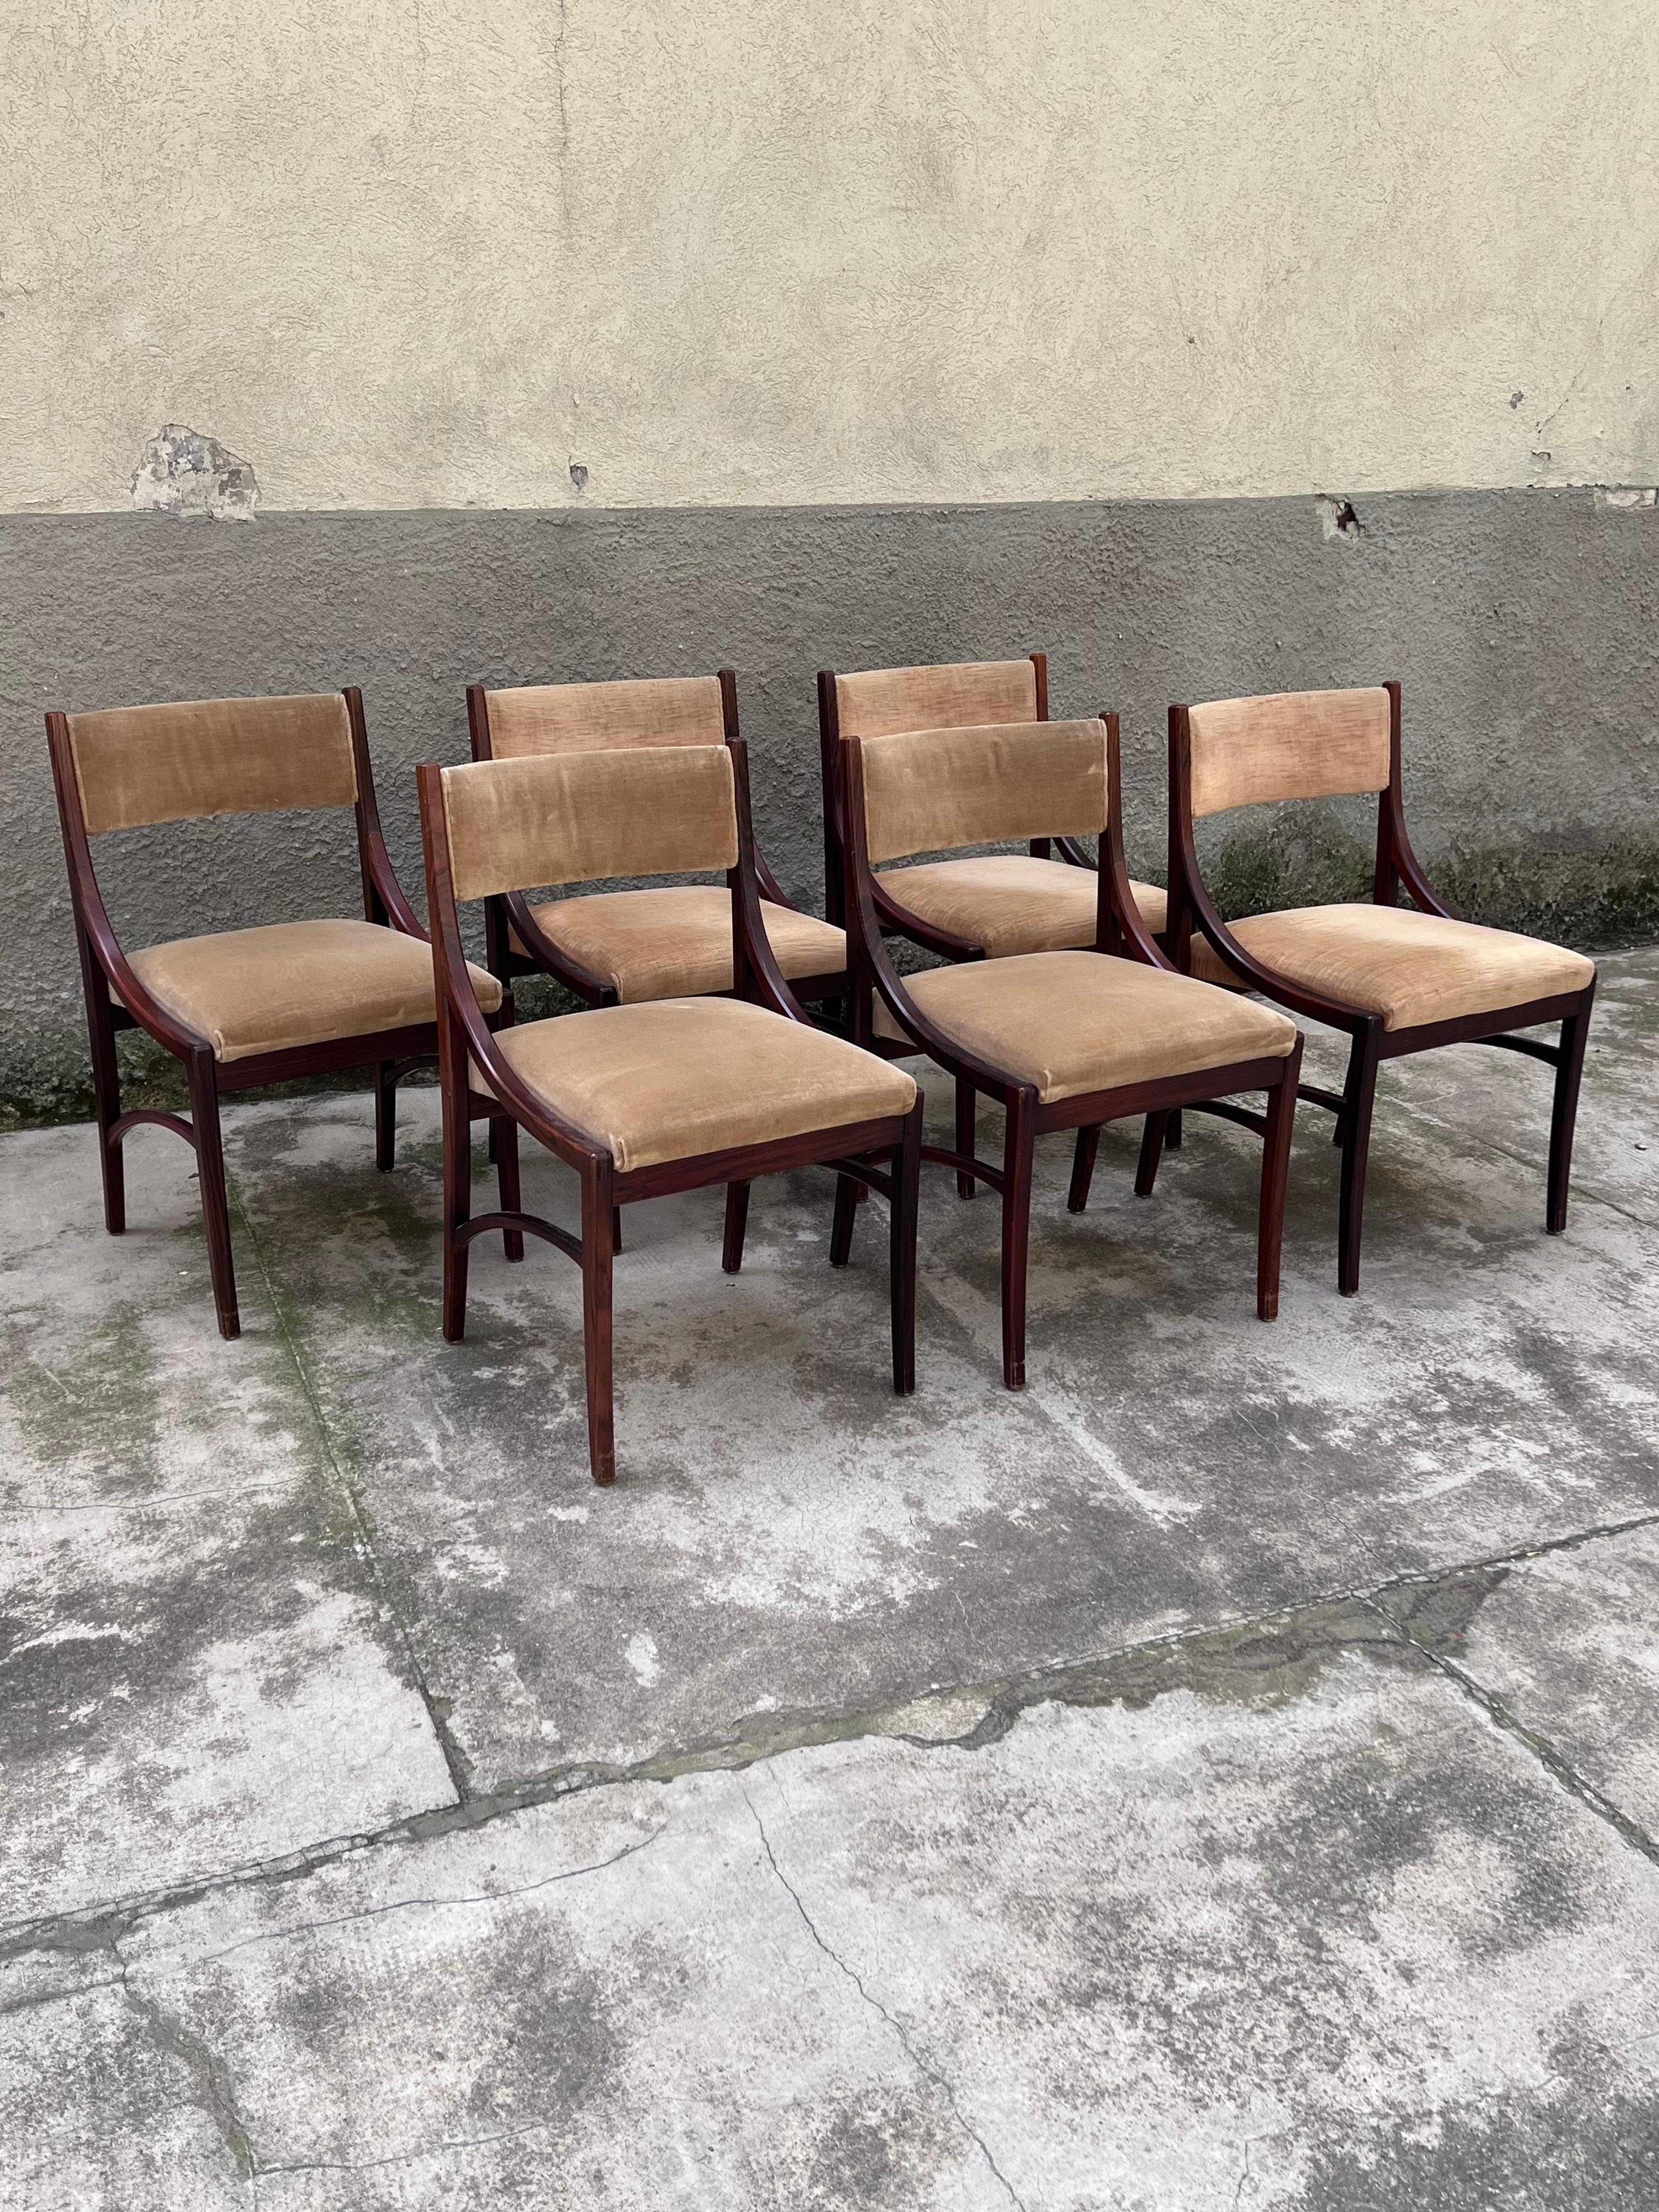 Mid-Century Modern Set of Six Mahogany Chairs Mod.110 by Ico Parisi for Cassina - Italy - 1960s For Sale